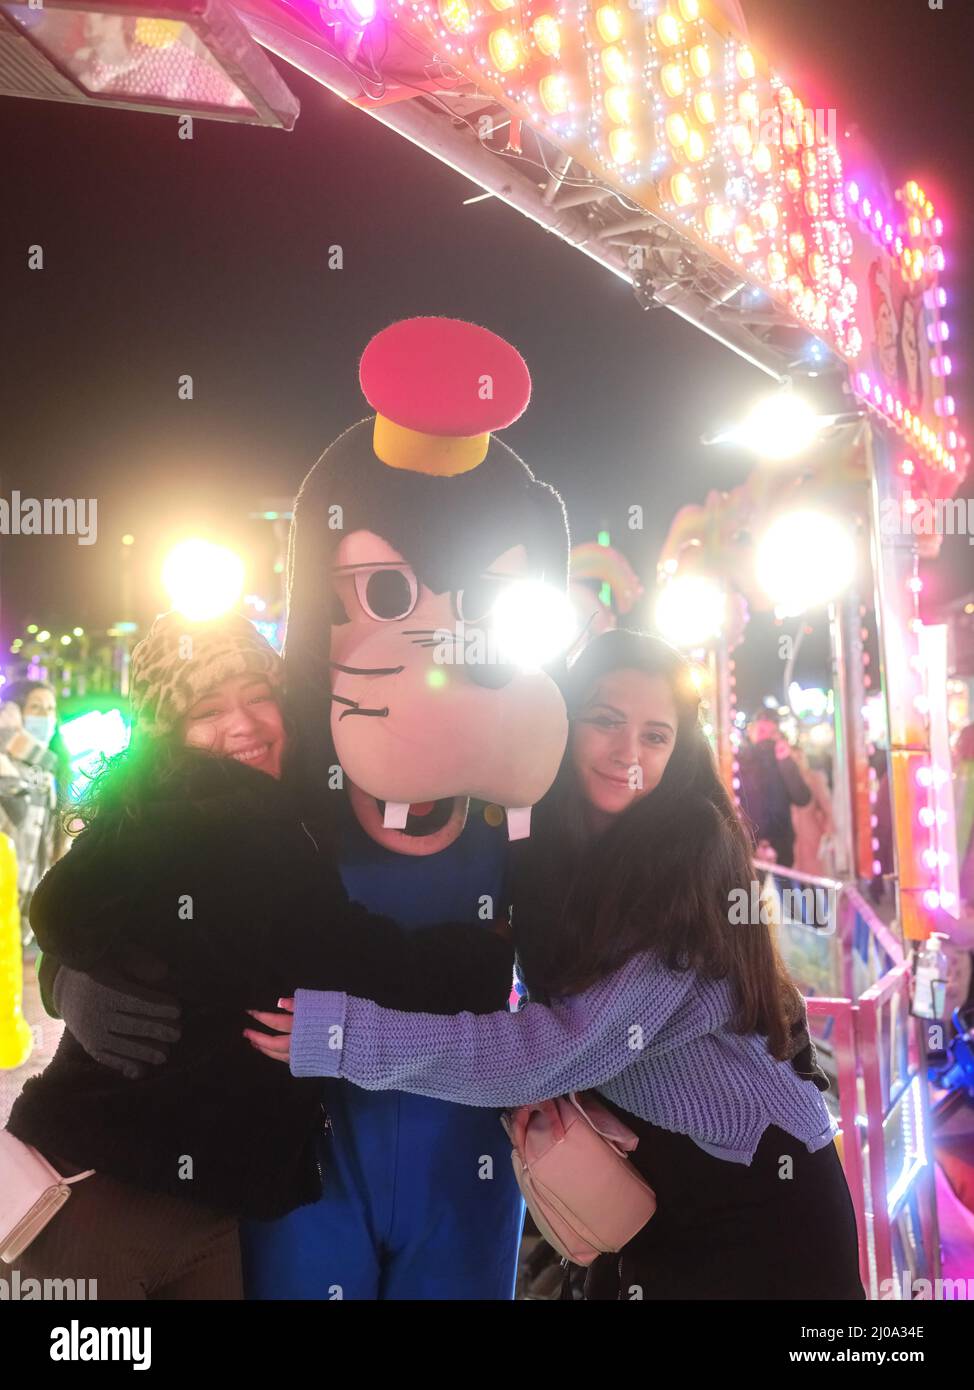 Girls embracing an actor dressed like Goofy dog in a theme park at night Stock Photo